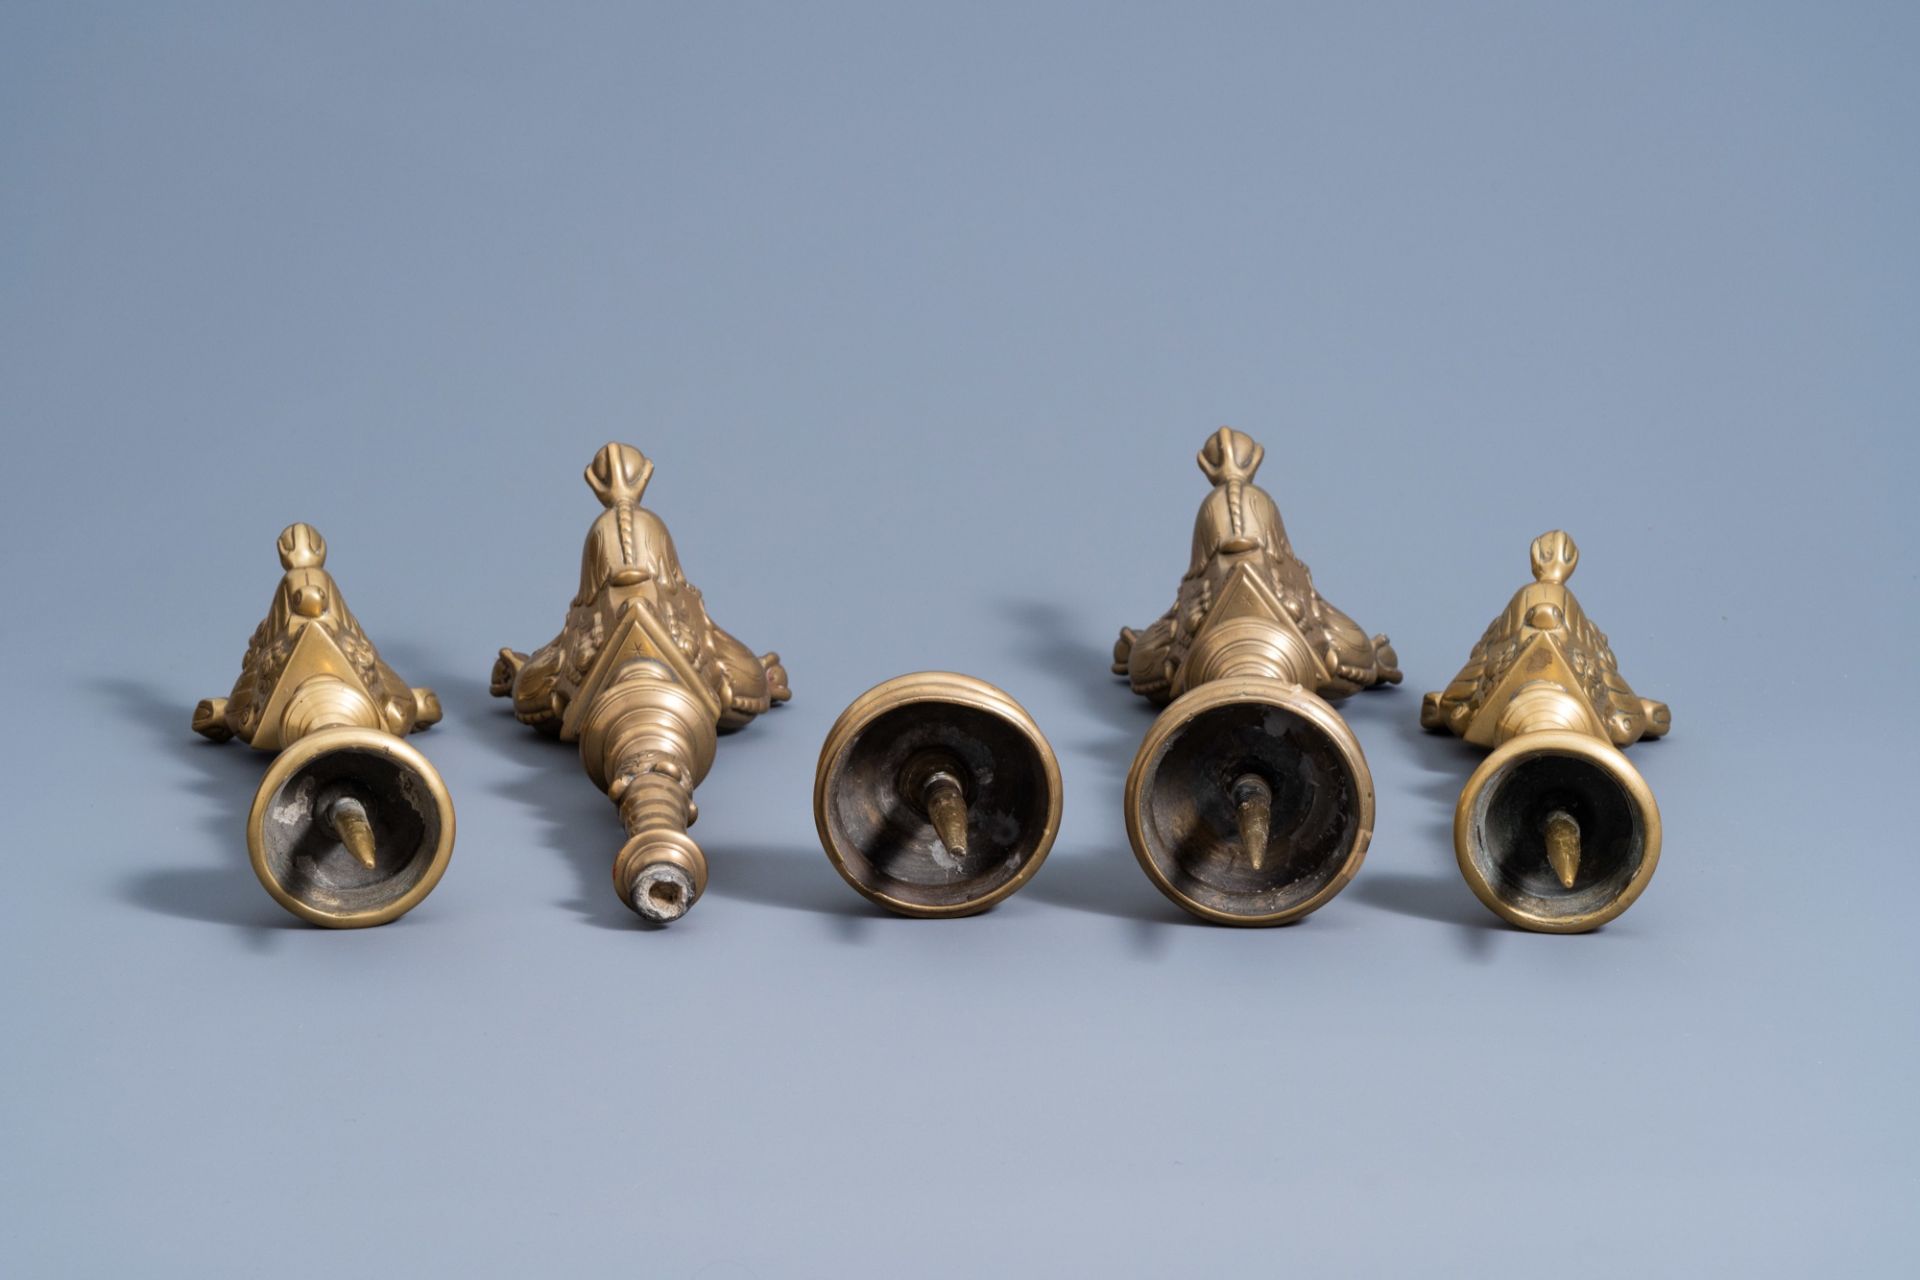 Two pairs of bronze pricket candlesticks, Flanders or The Netherlands, 17th C. - Image 6 of 7